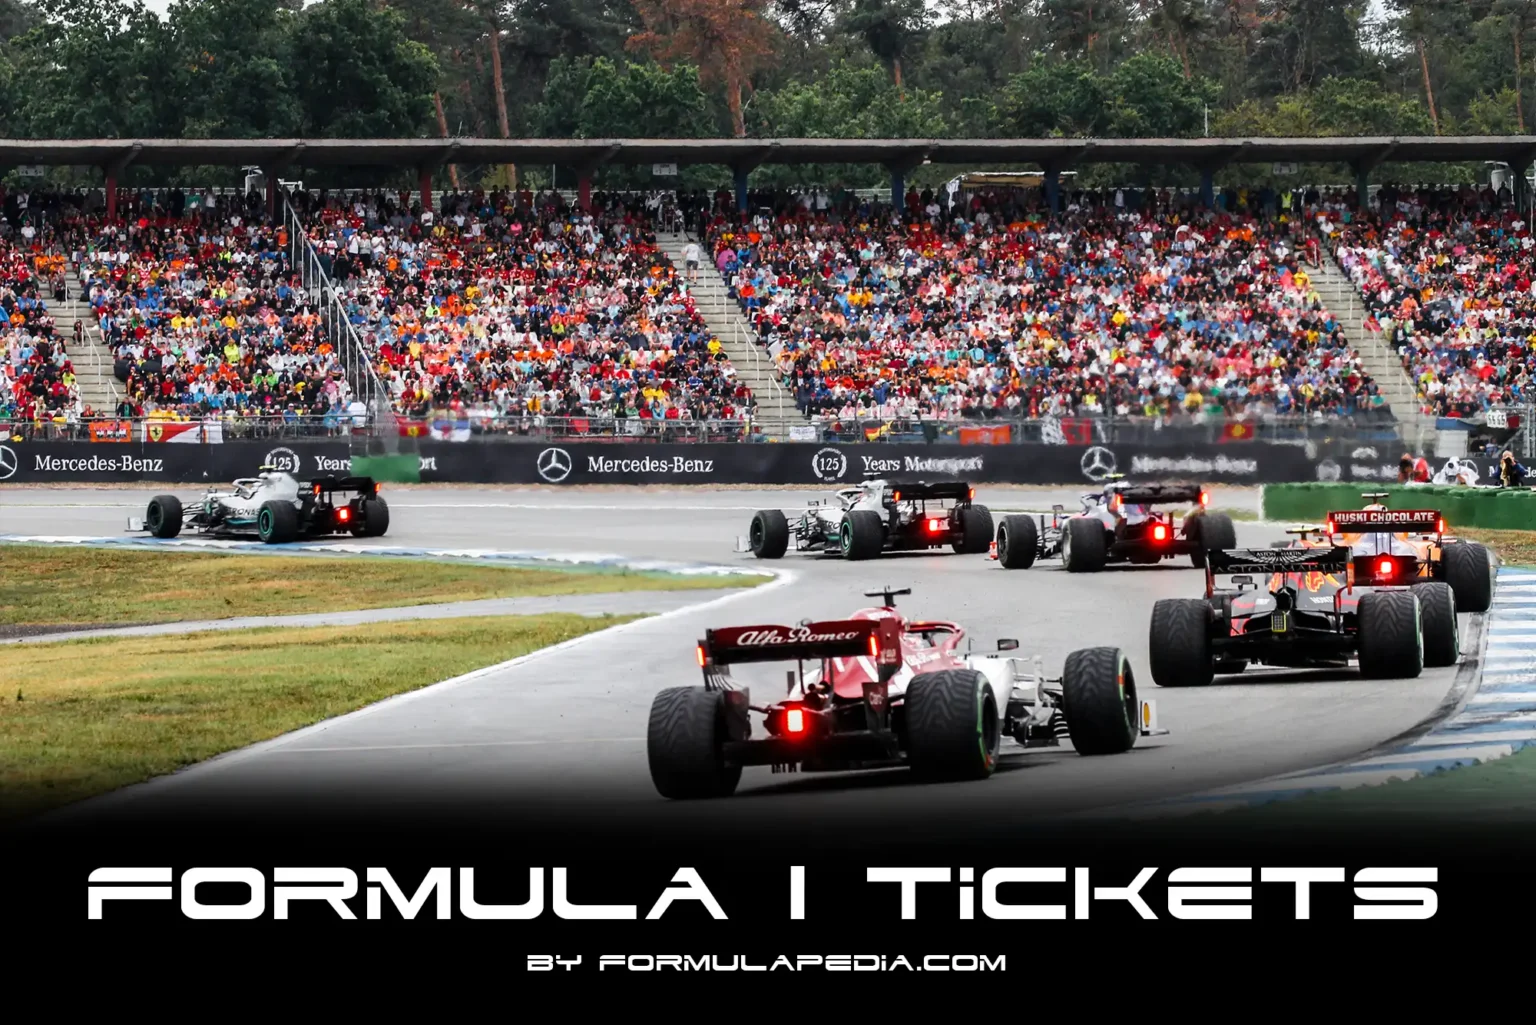 How much are F1 tickets?